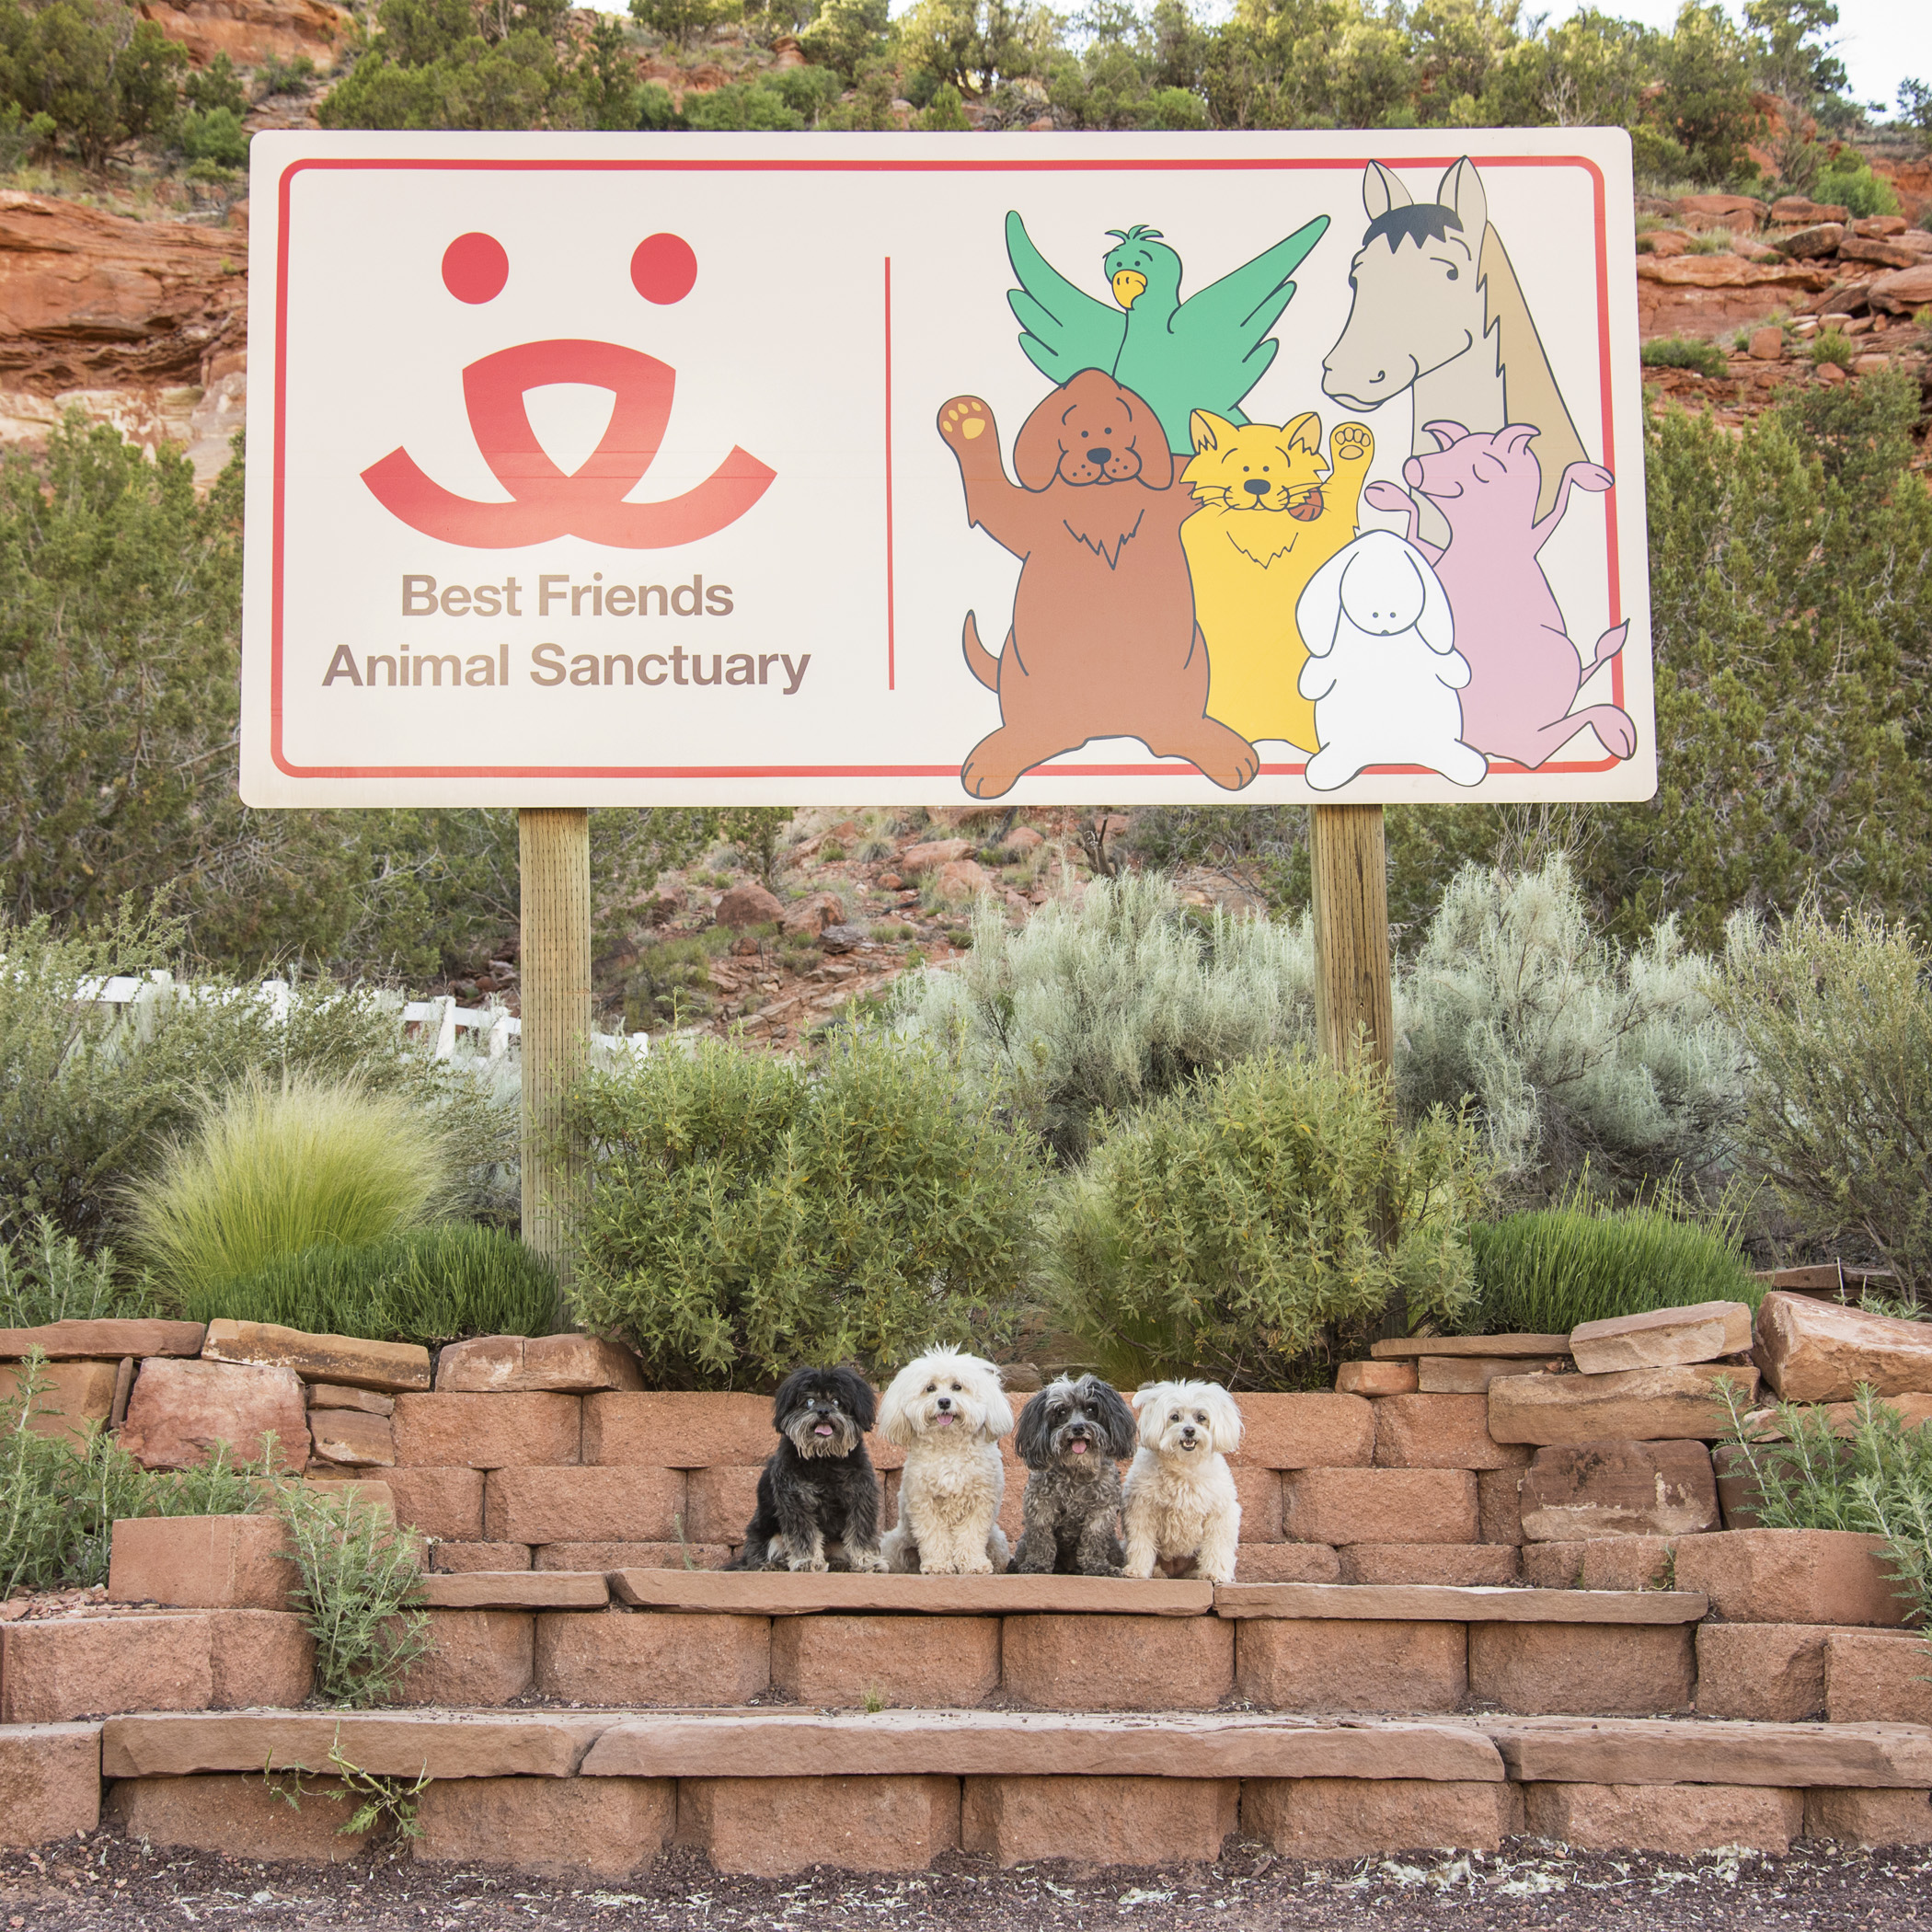  If you’re ever in Southern Utah, and have the chance, we highly recommend spending a day (or more) at Best Friends Animal Sanctuary. Even if you can’t volunteer, at least stop by and take a tour! They are an amazing organization, dedicated and commi